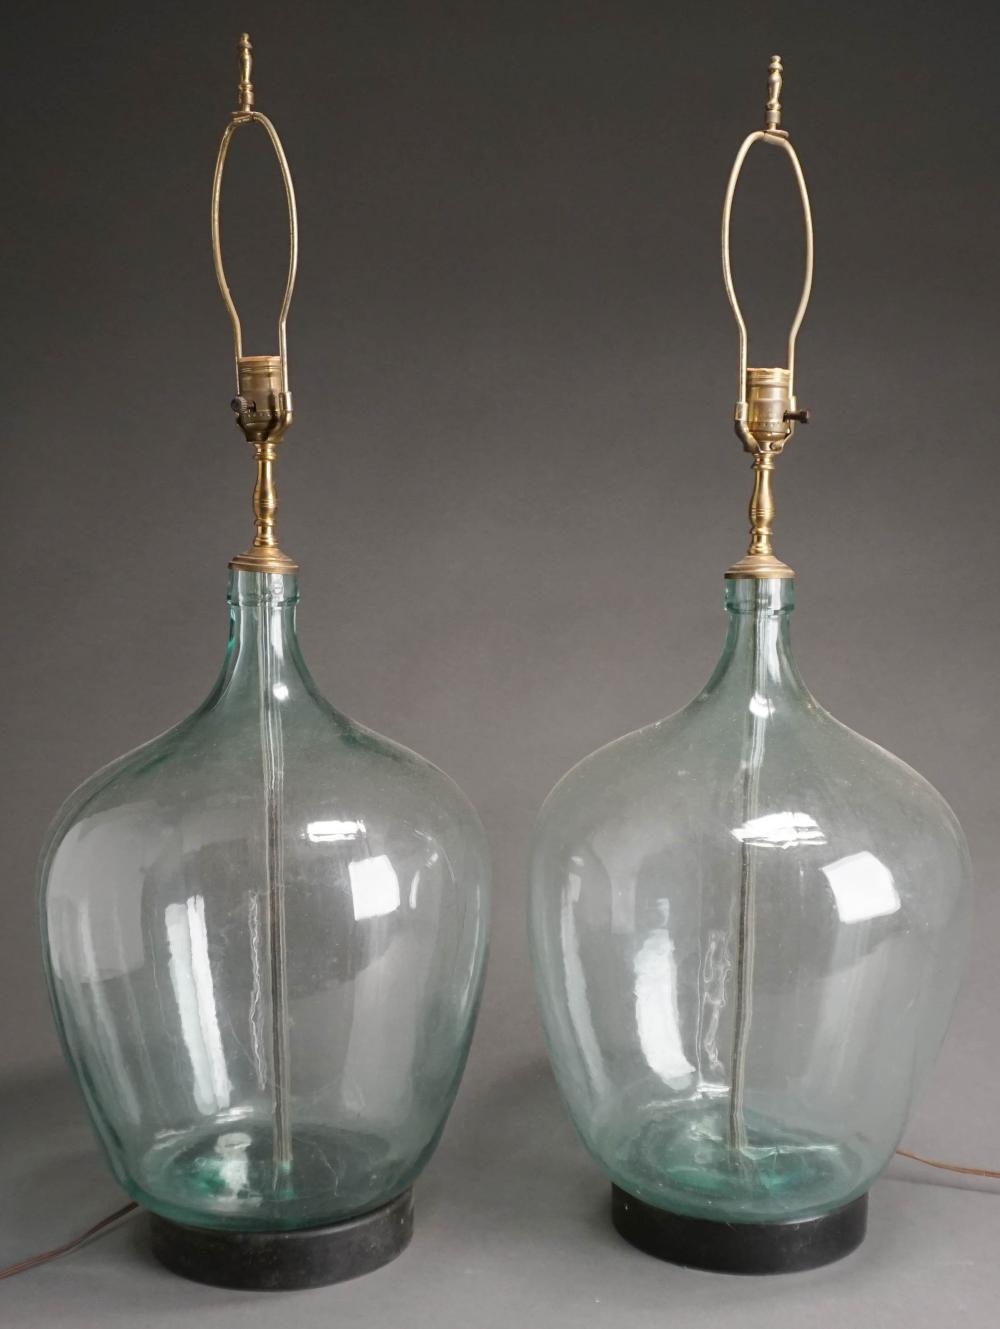 PAIR OF ANTIQUE GLASS DEMIJOHNS